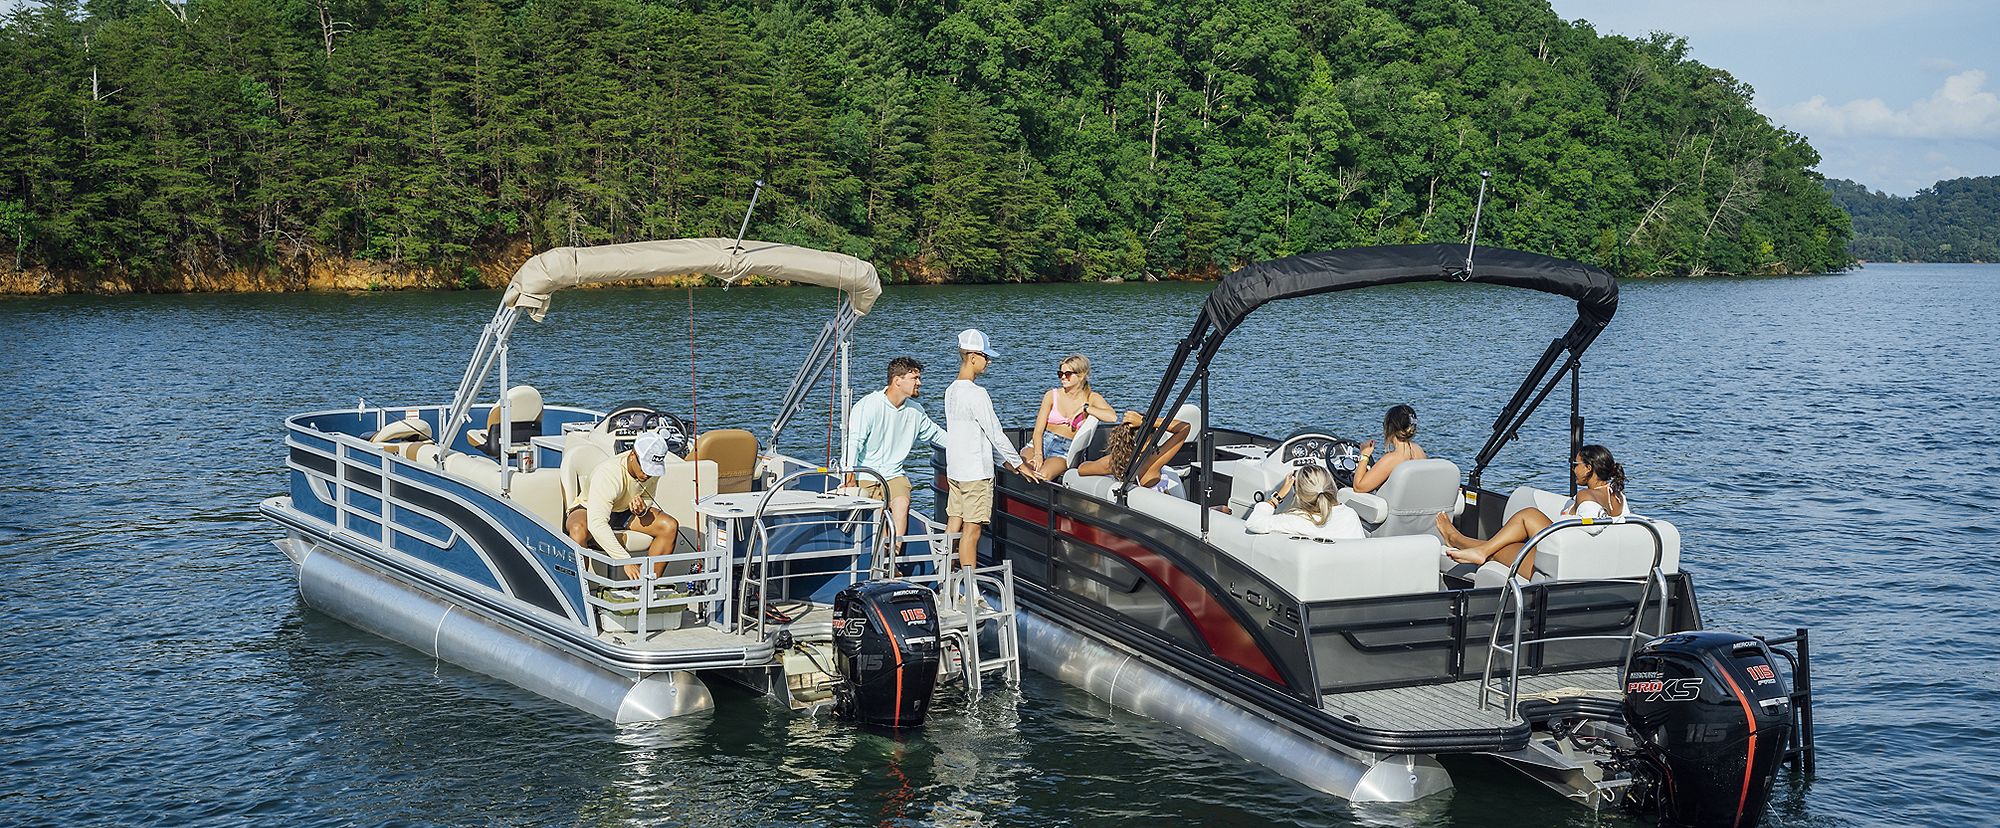 Friends and Family on Two Lowe Pontoon Boats, Stern View